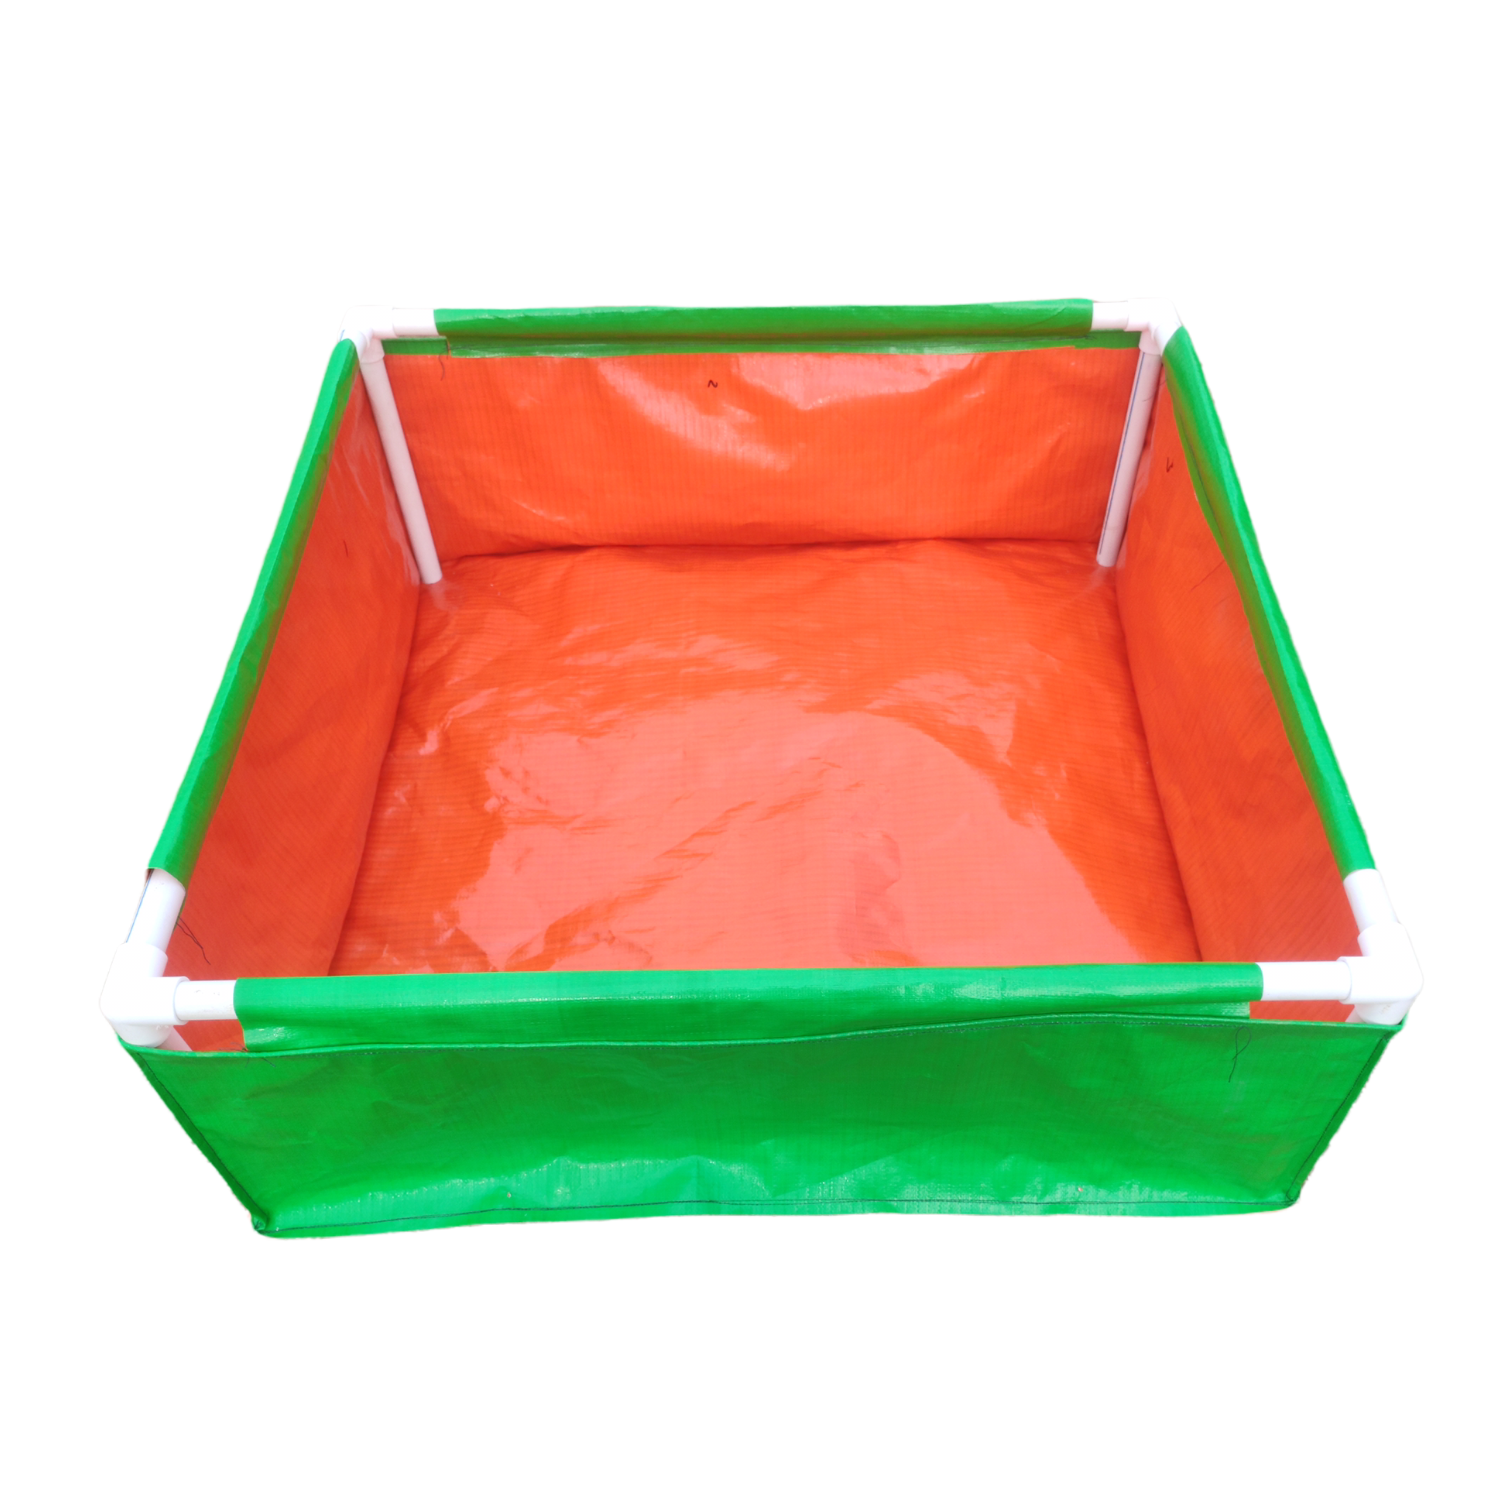 36x36x12 Inches (3x3x1 Ft) - 220 GSM HDPE Rectangular Grow Bag With Supporting PVC Pipes